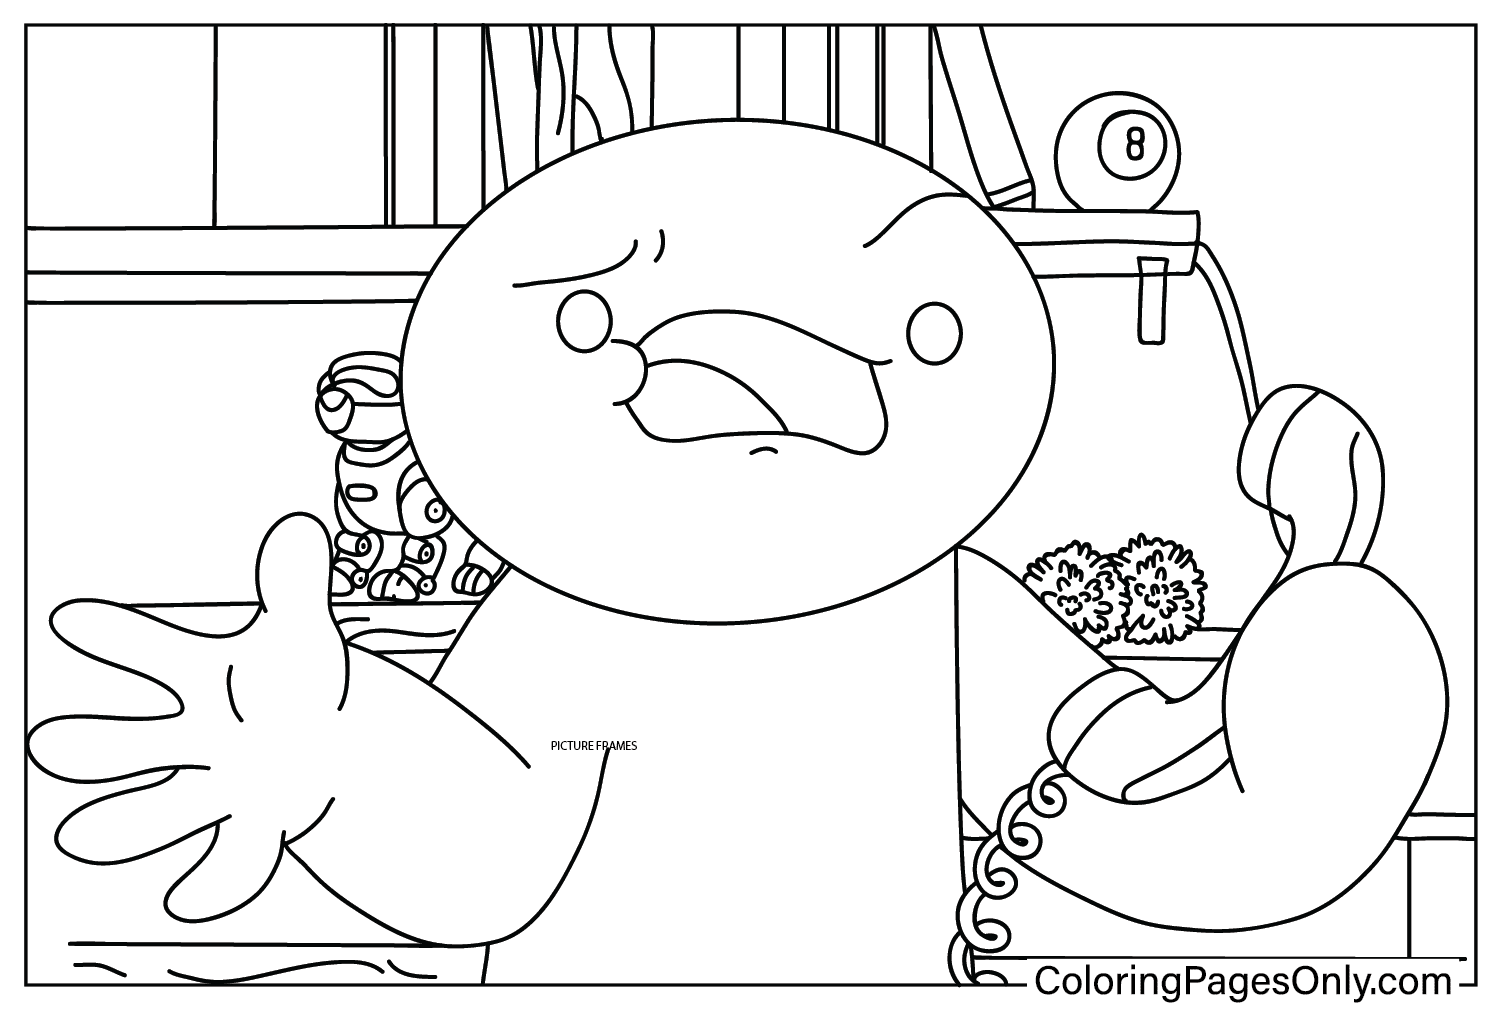 TheOdd1sOut Picture to Color from TheOdd1sOut